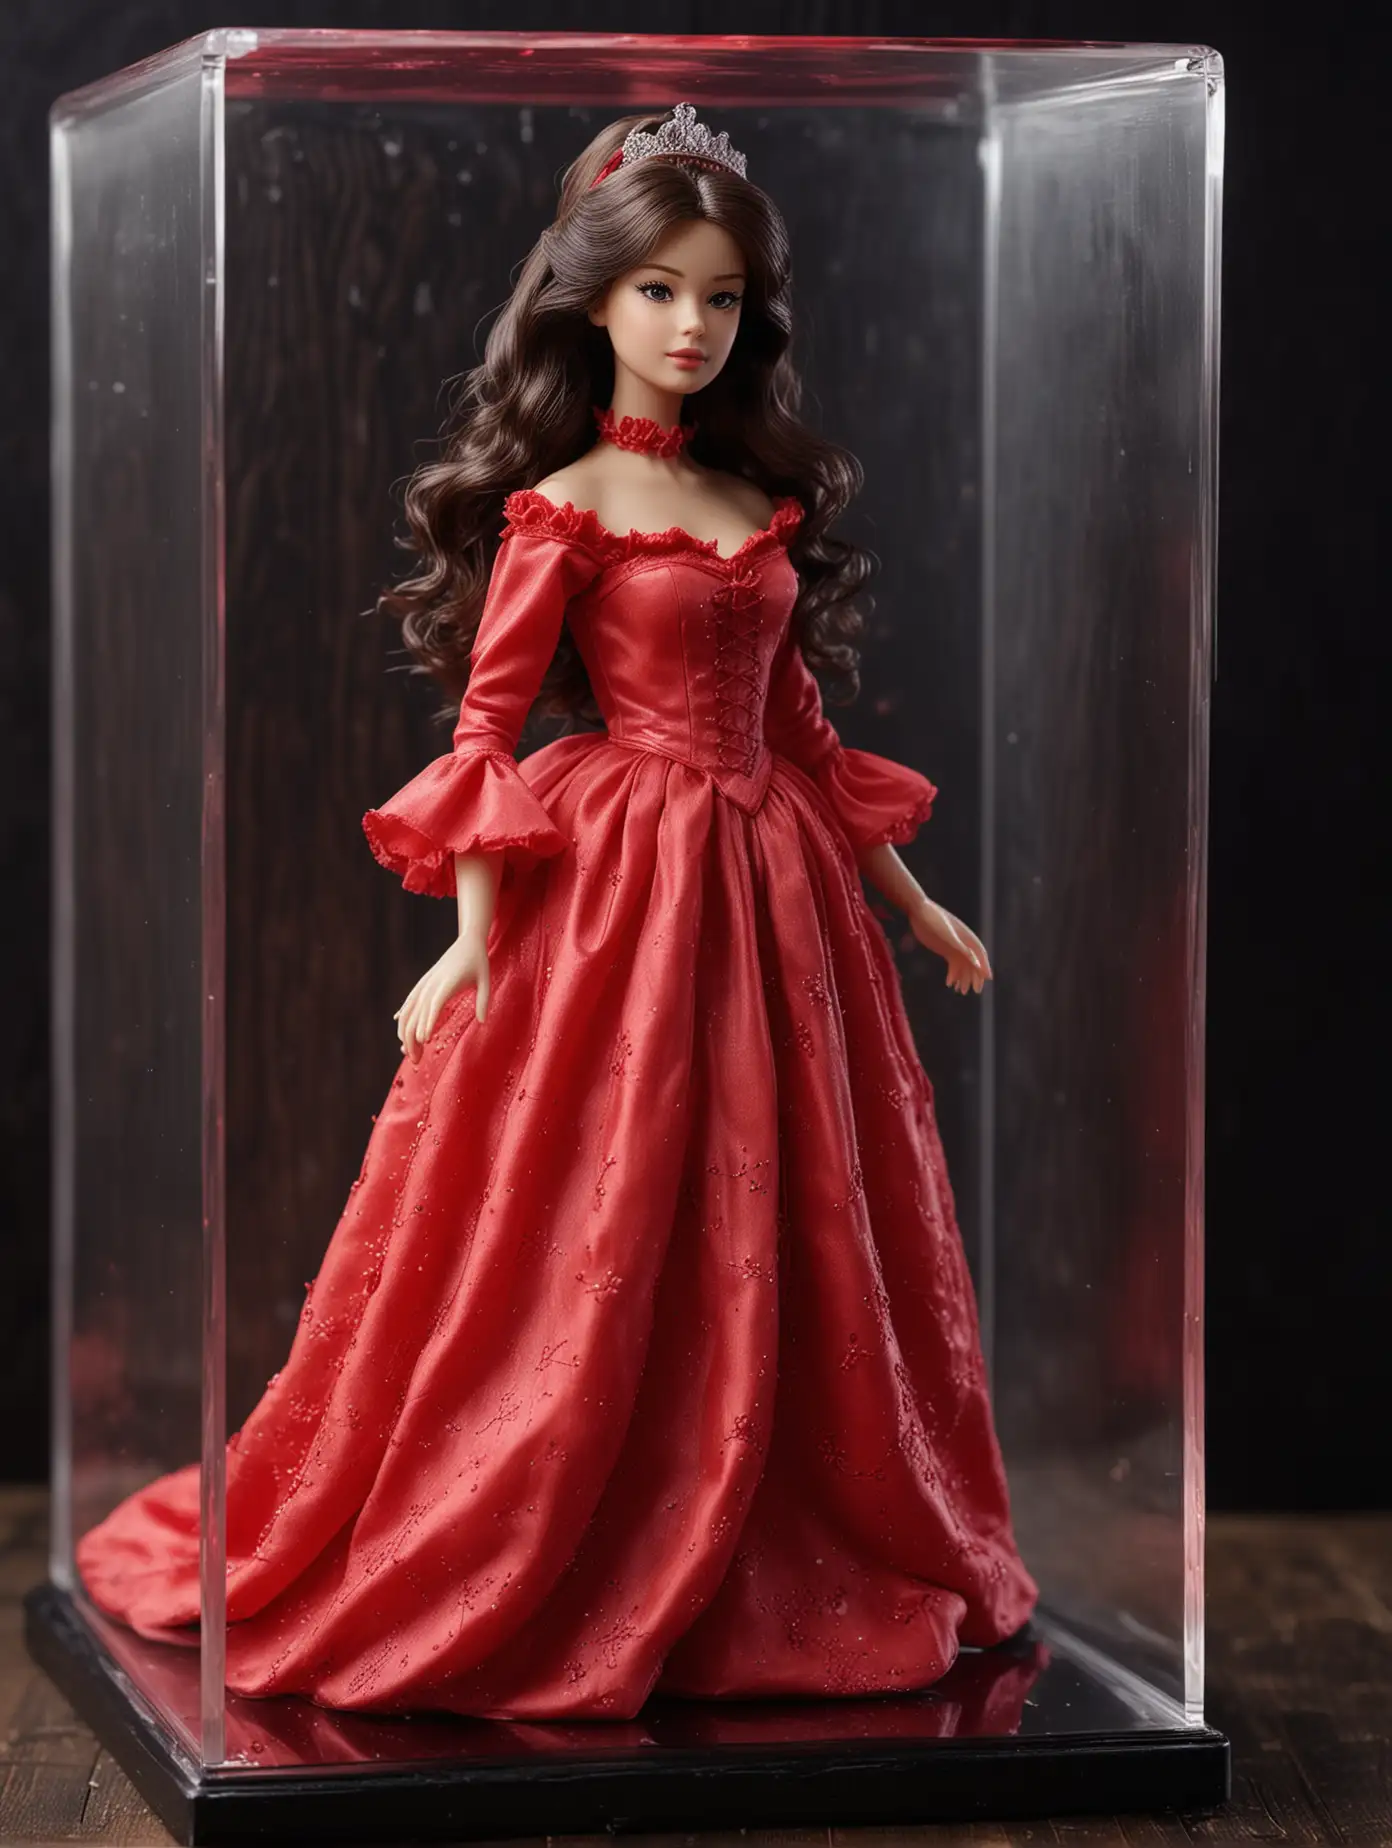 Barbie teenager Mikako Tabe wax miniature is beautiful.wavy hair. Wearing a Cinderella red costume.Standing on a glass black wooden box. realistis, realistic, film stock, bright colors"